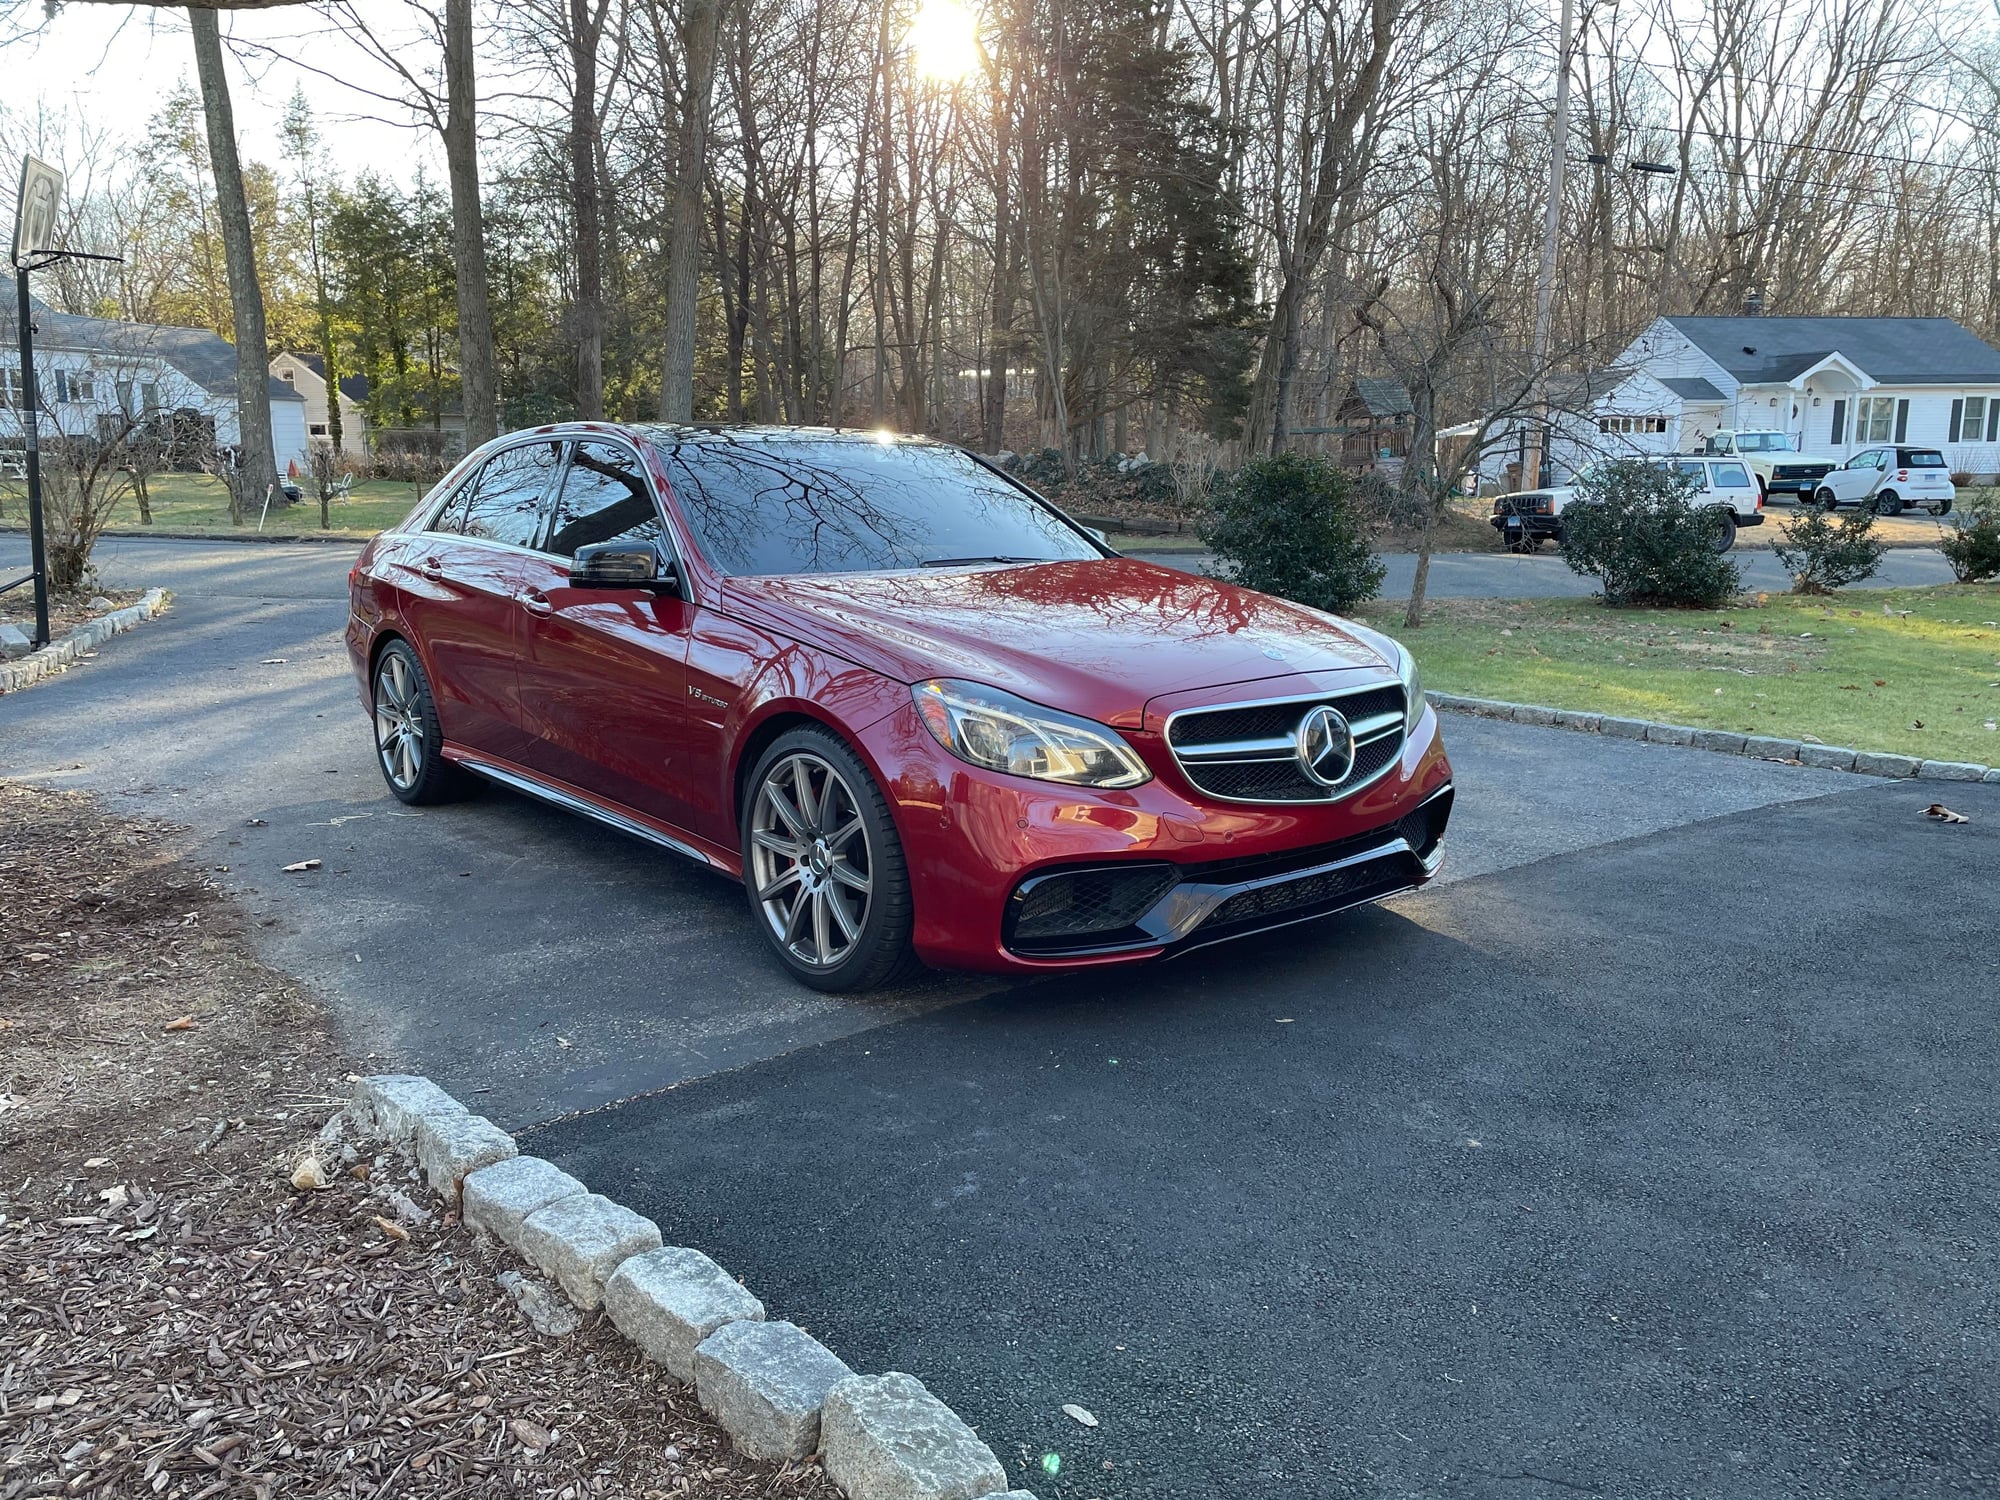 2014 Mercedes-Benz E63 AMG S - considering selling '14 cardinal red e63s - Used - VIN wddhf7gb4ea973911 - 92,000 Miles - Red - Stamford, CT 06905, United States